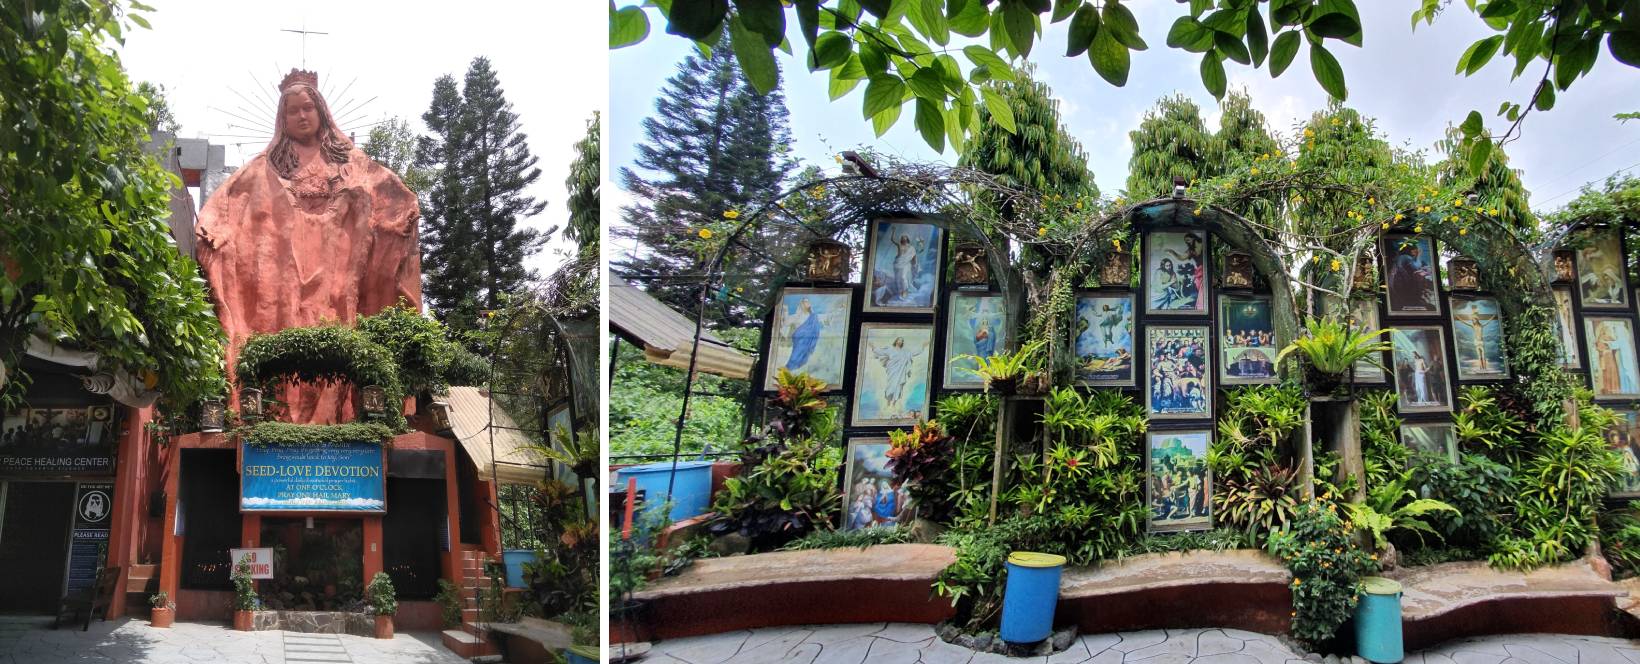 10 Tagaytay Attractions & Food Spots - Our Lady of Manaoag